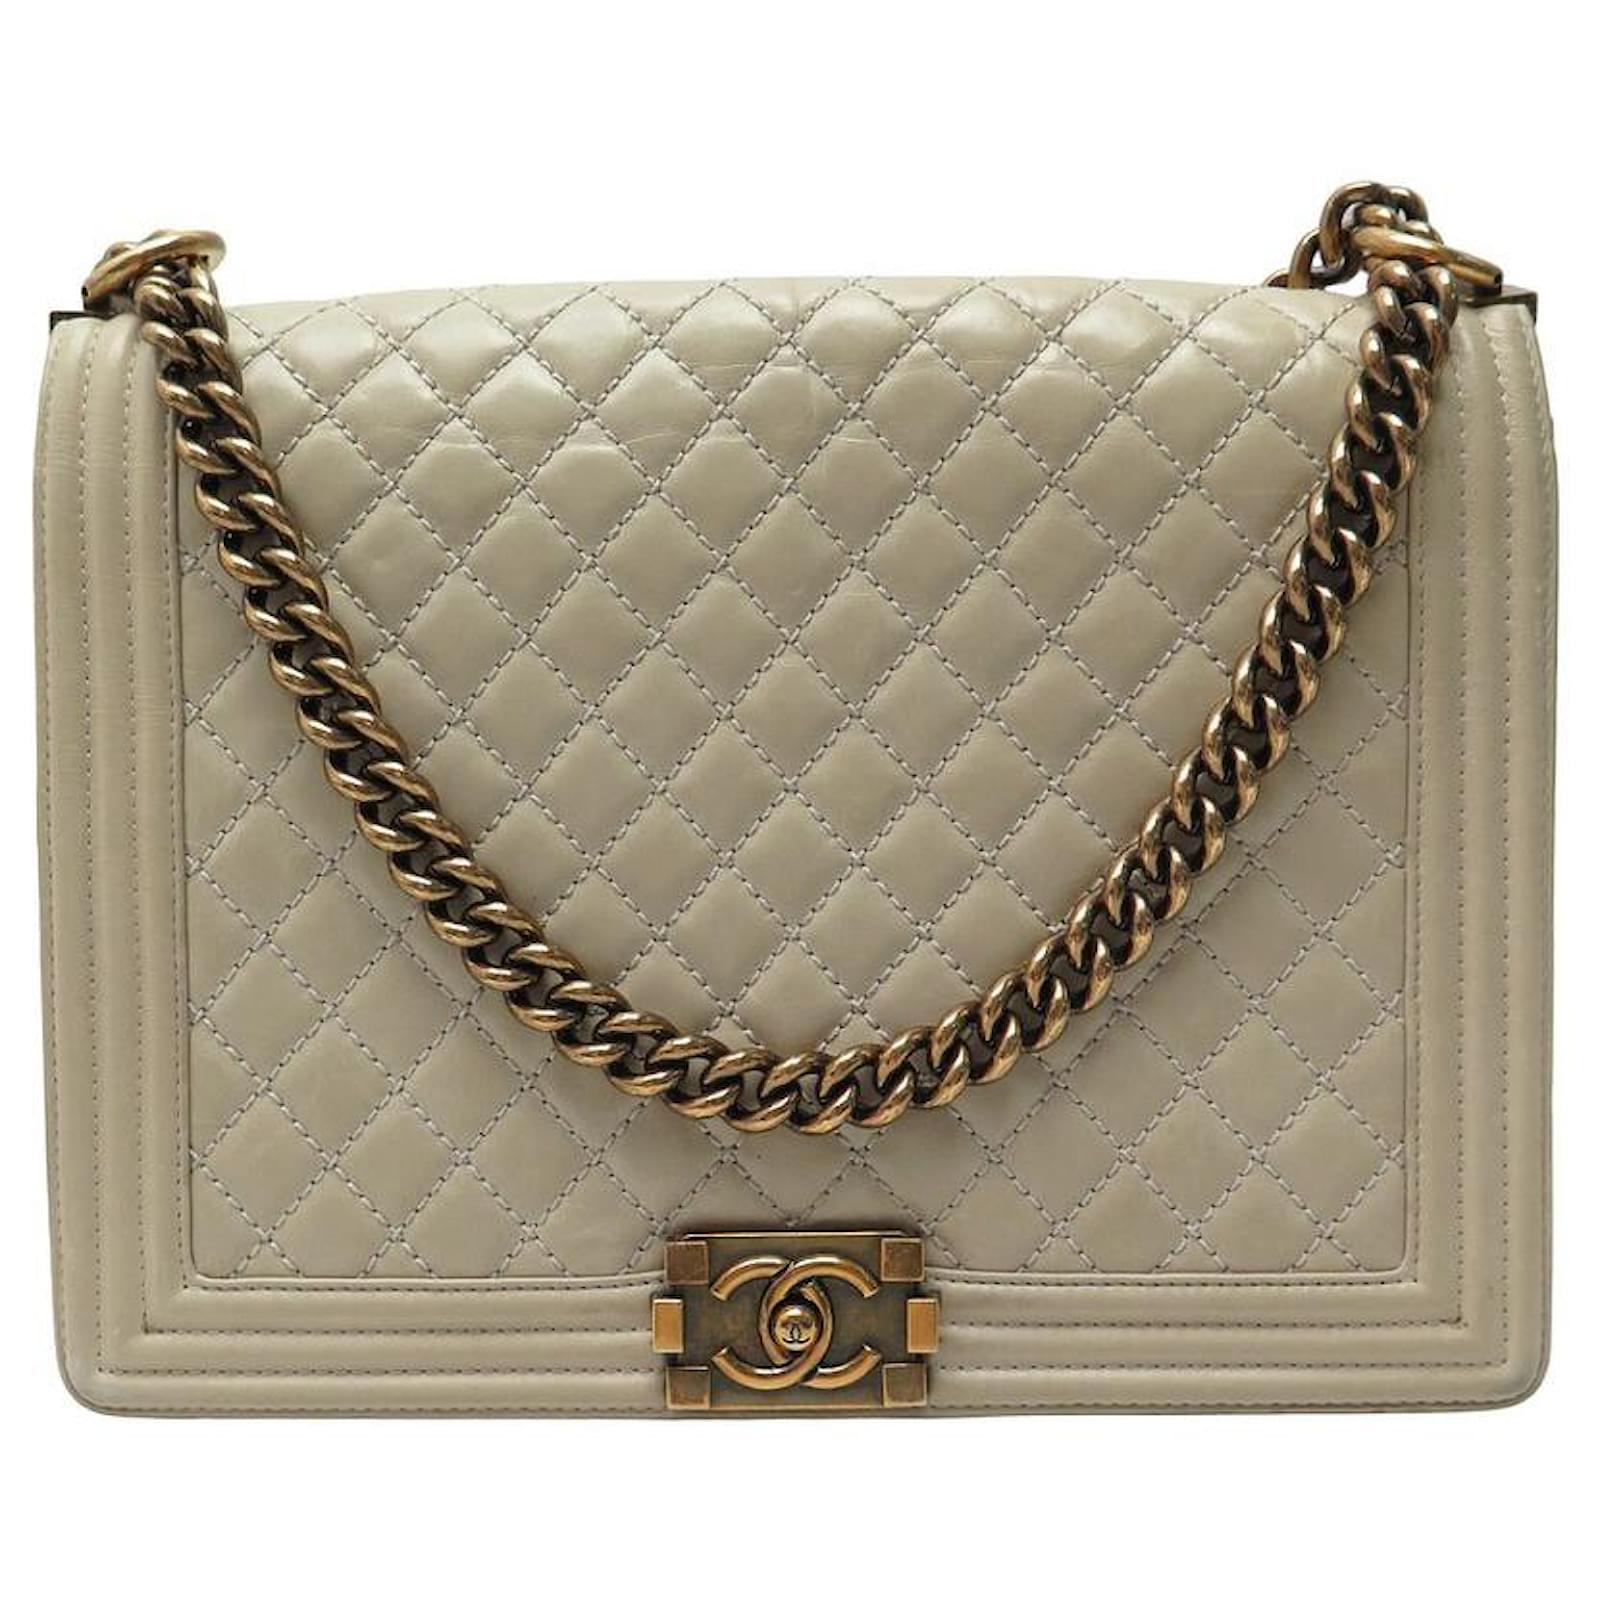 CHANEL BOY MAXI JUMBO BEIGE QUILTED LEATHER BANDOULIERE HANDBAG